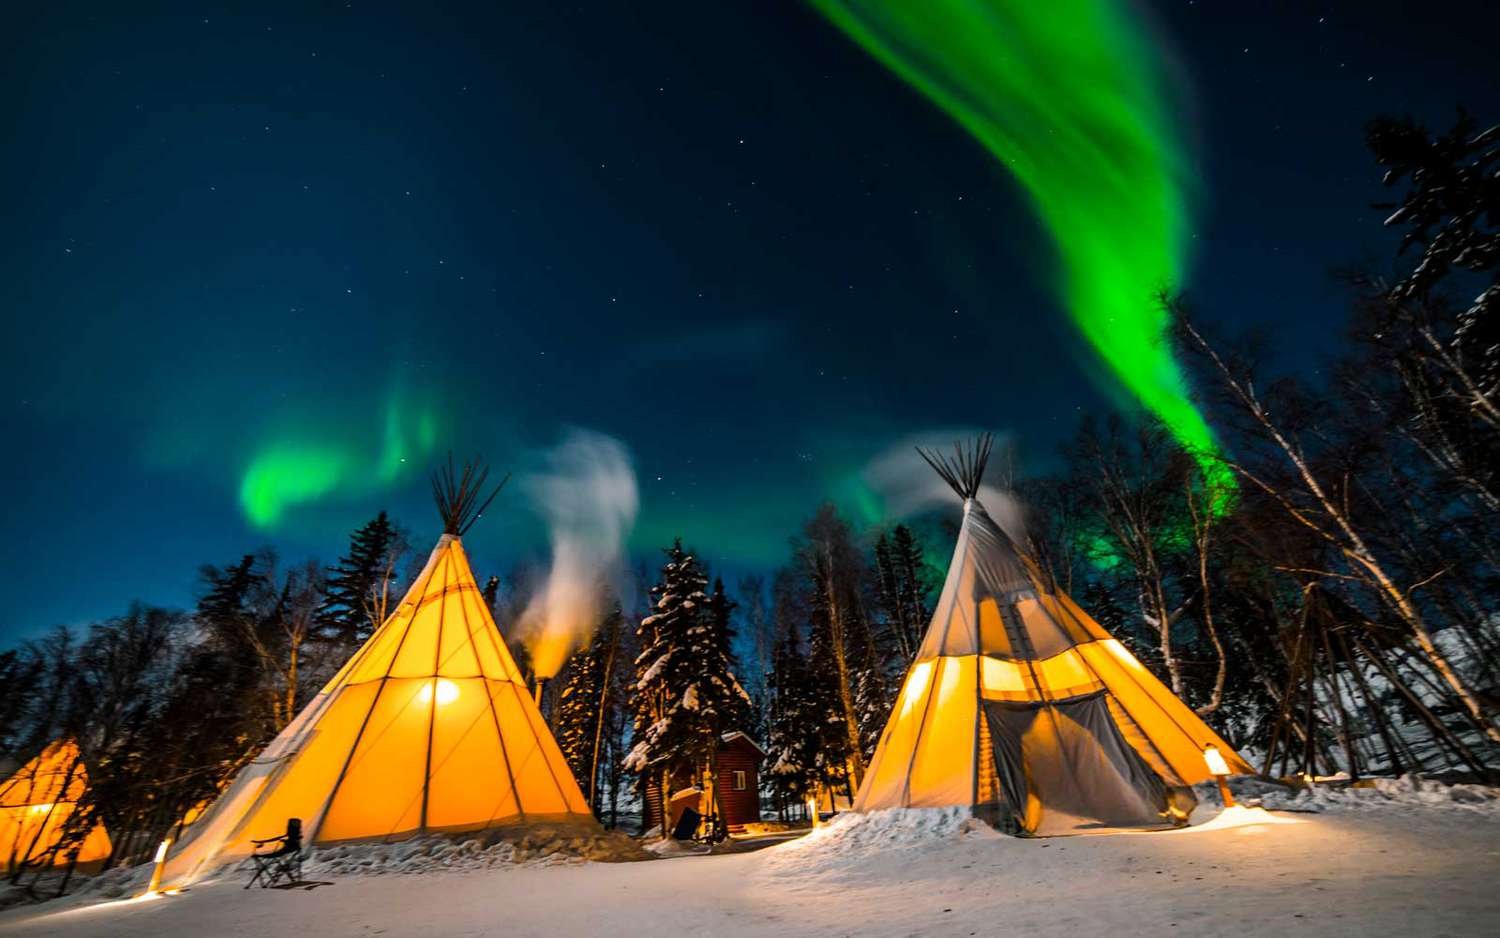 A Canadian Teepee Village Is One of the Best Places to See the Northern Lights